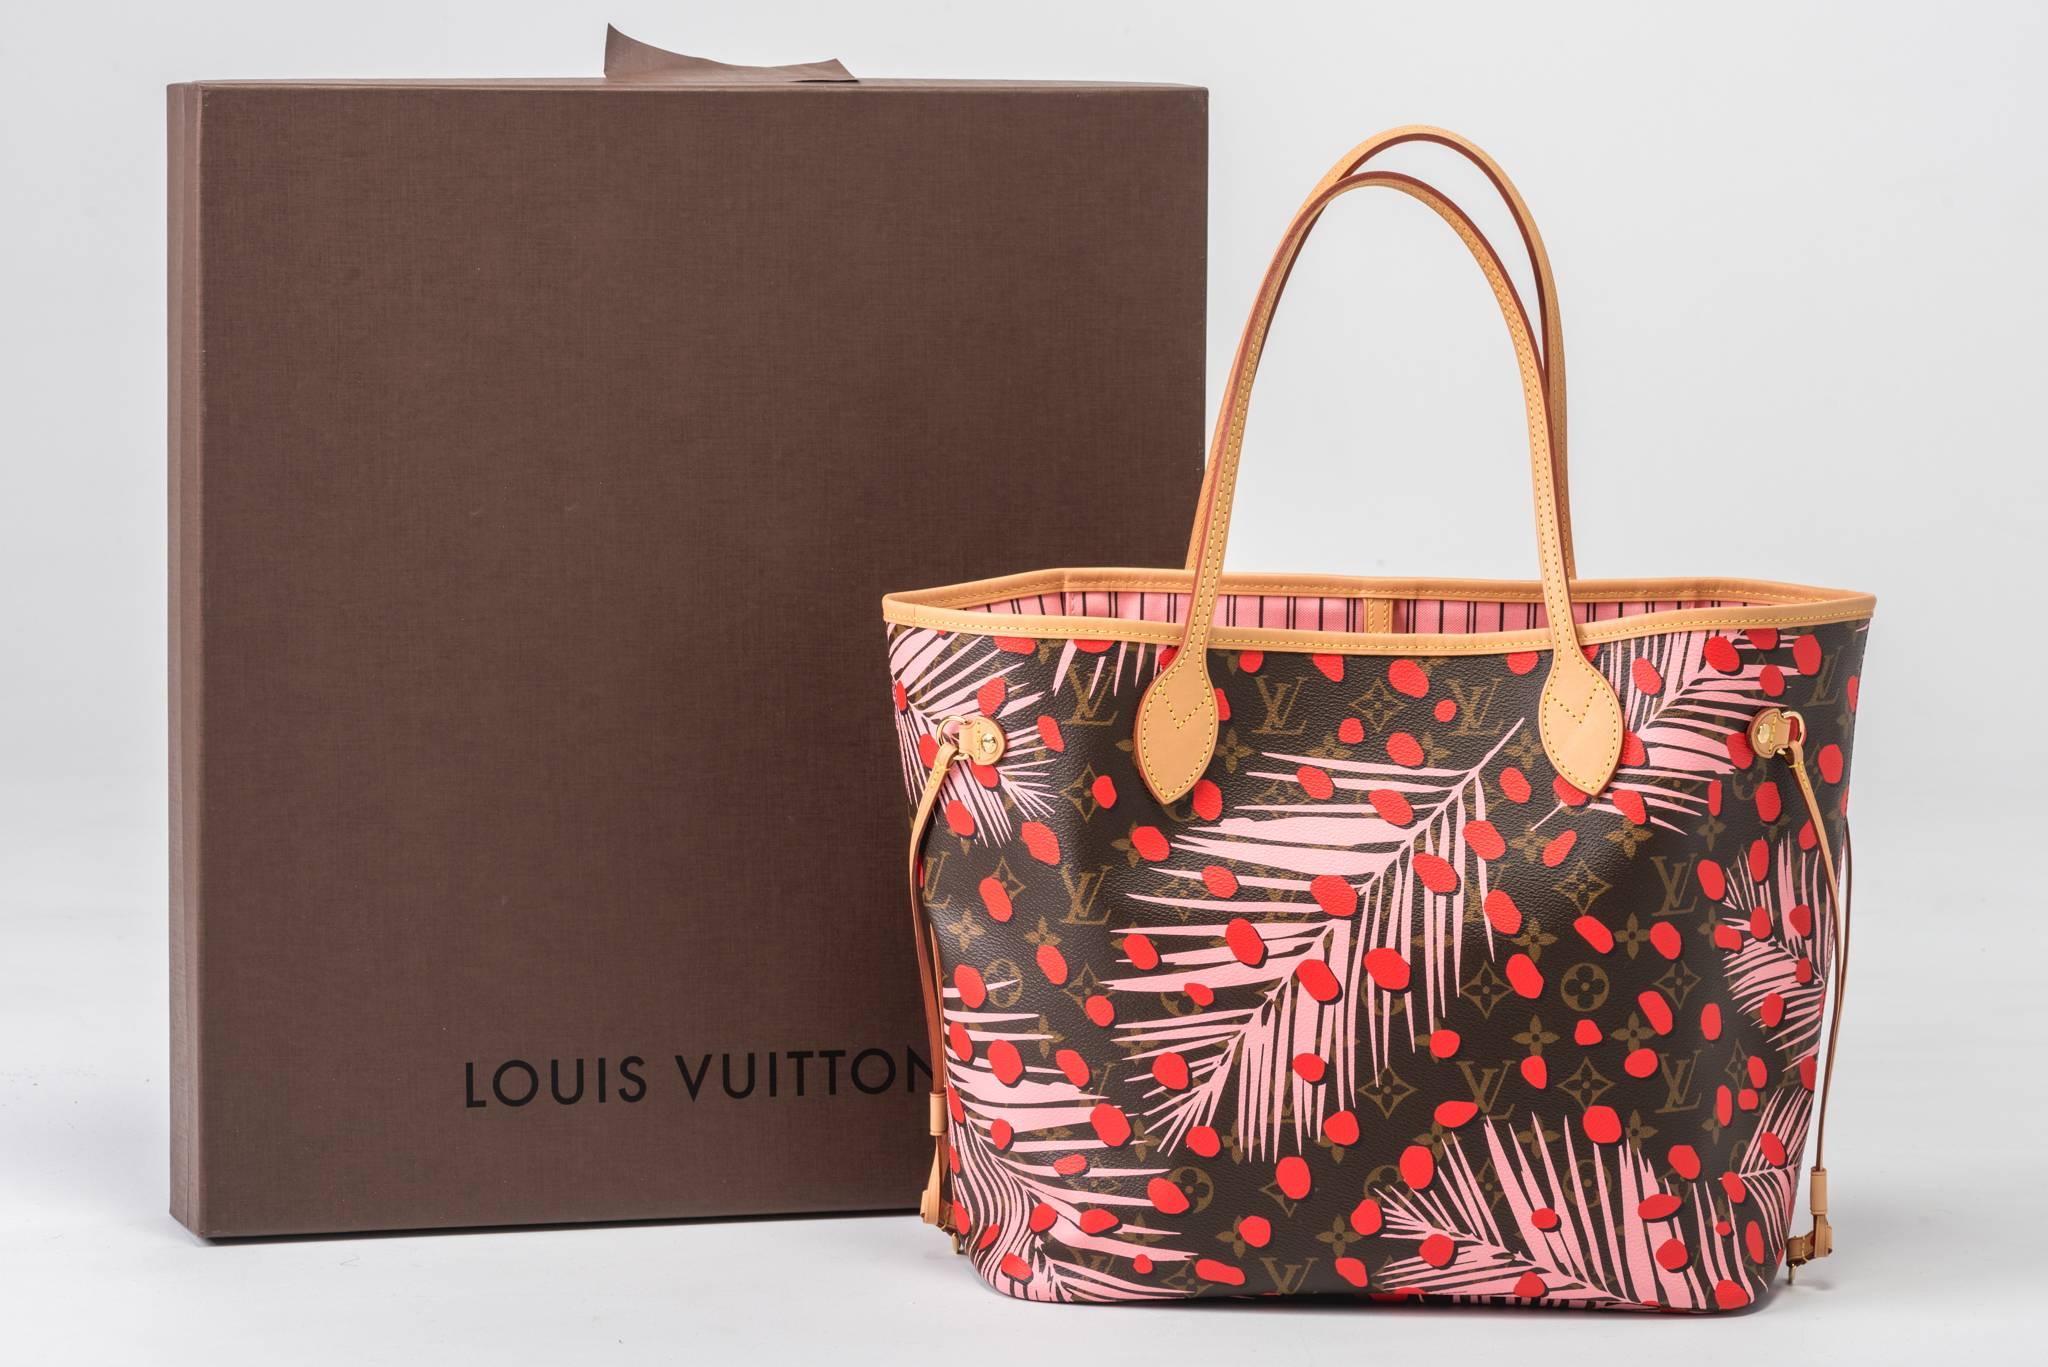 Louis Vuitton limited edition Palm Springs never full medium bag with pink palm leaves and red dots.
Interior pink cotton lining.
Brand new in box, comes with ribbon and shopper.